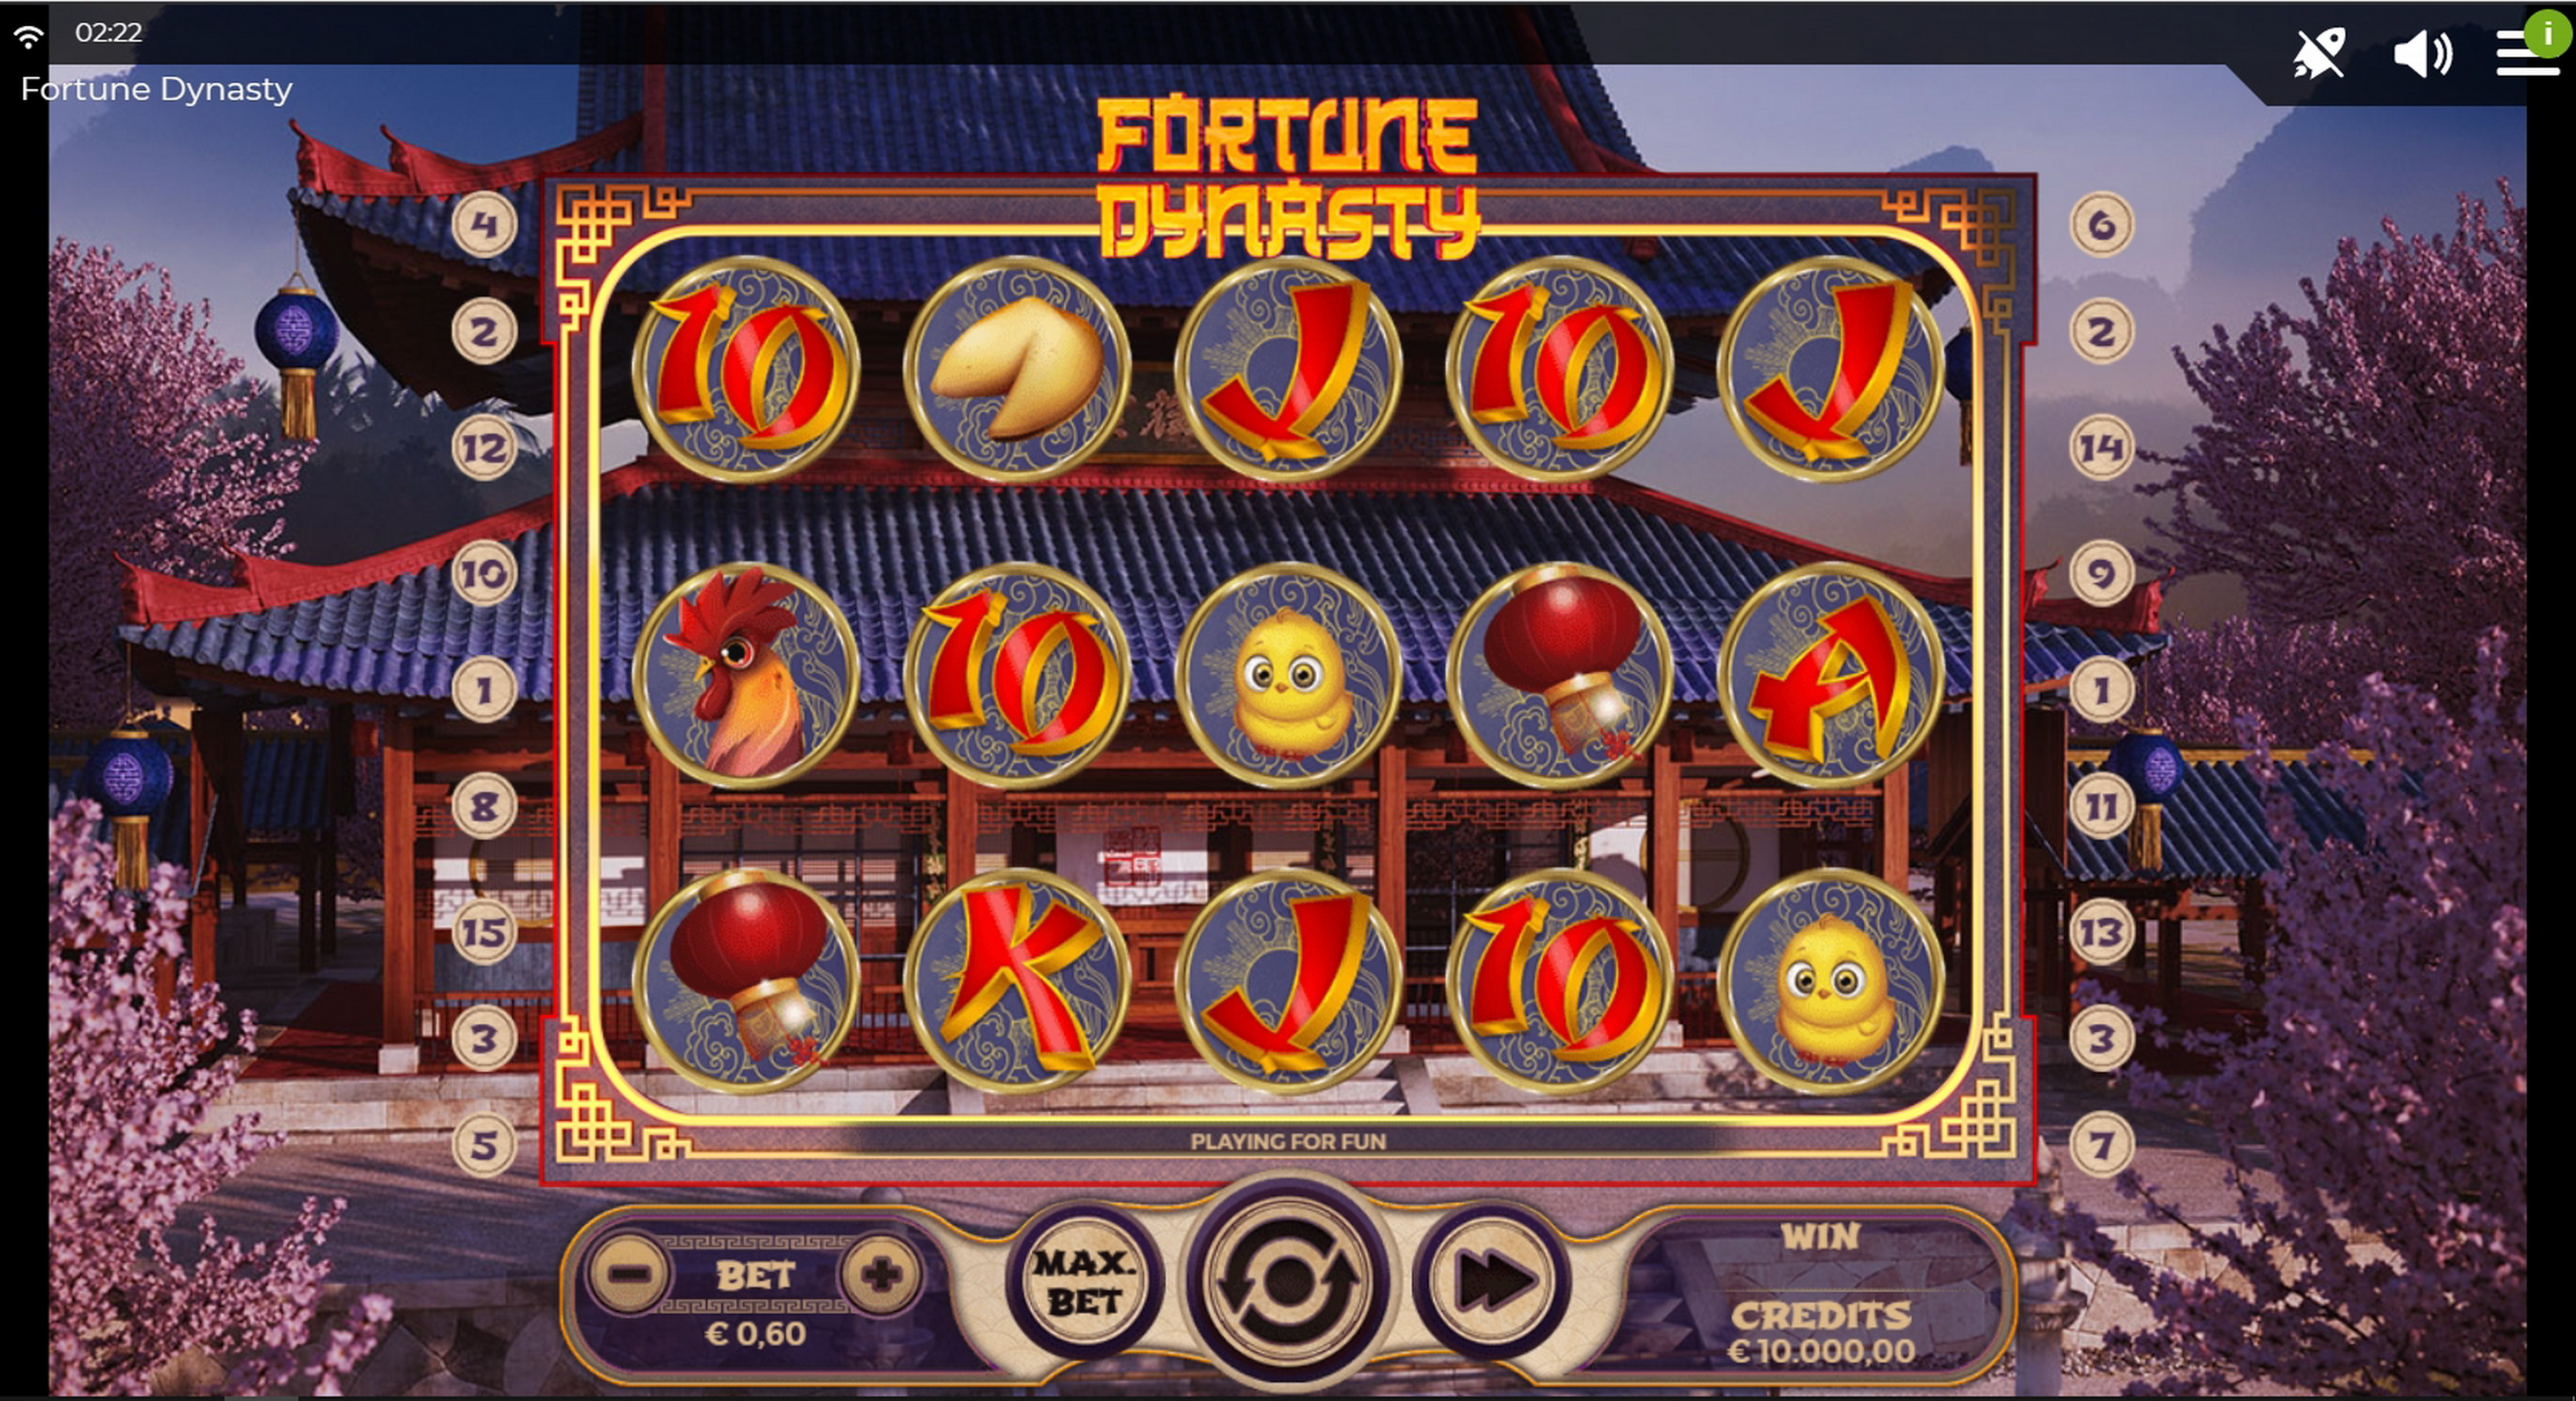 Reels in Fortune Dynasty Slot Game by Spinmatic